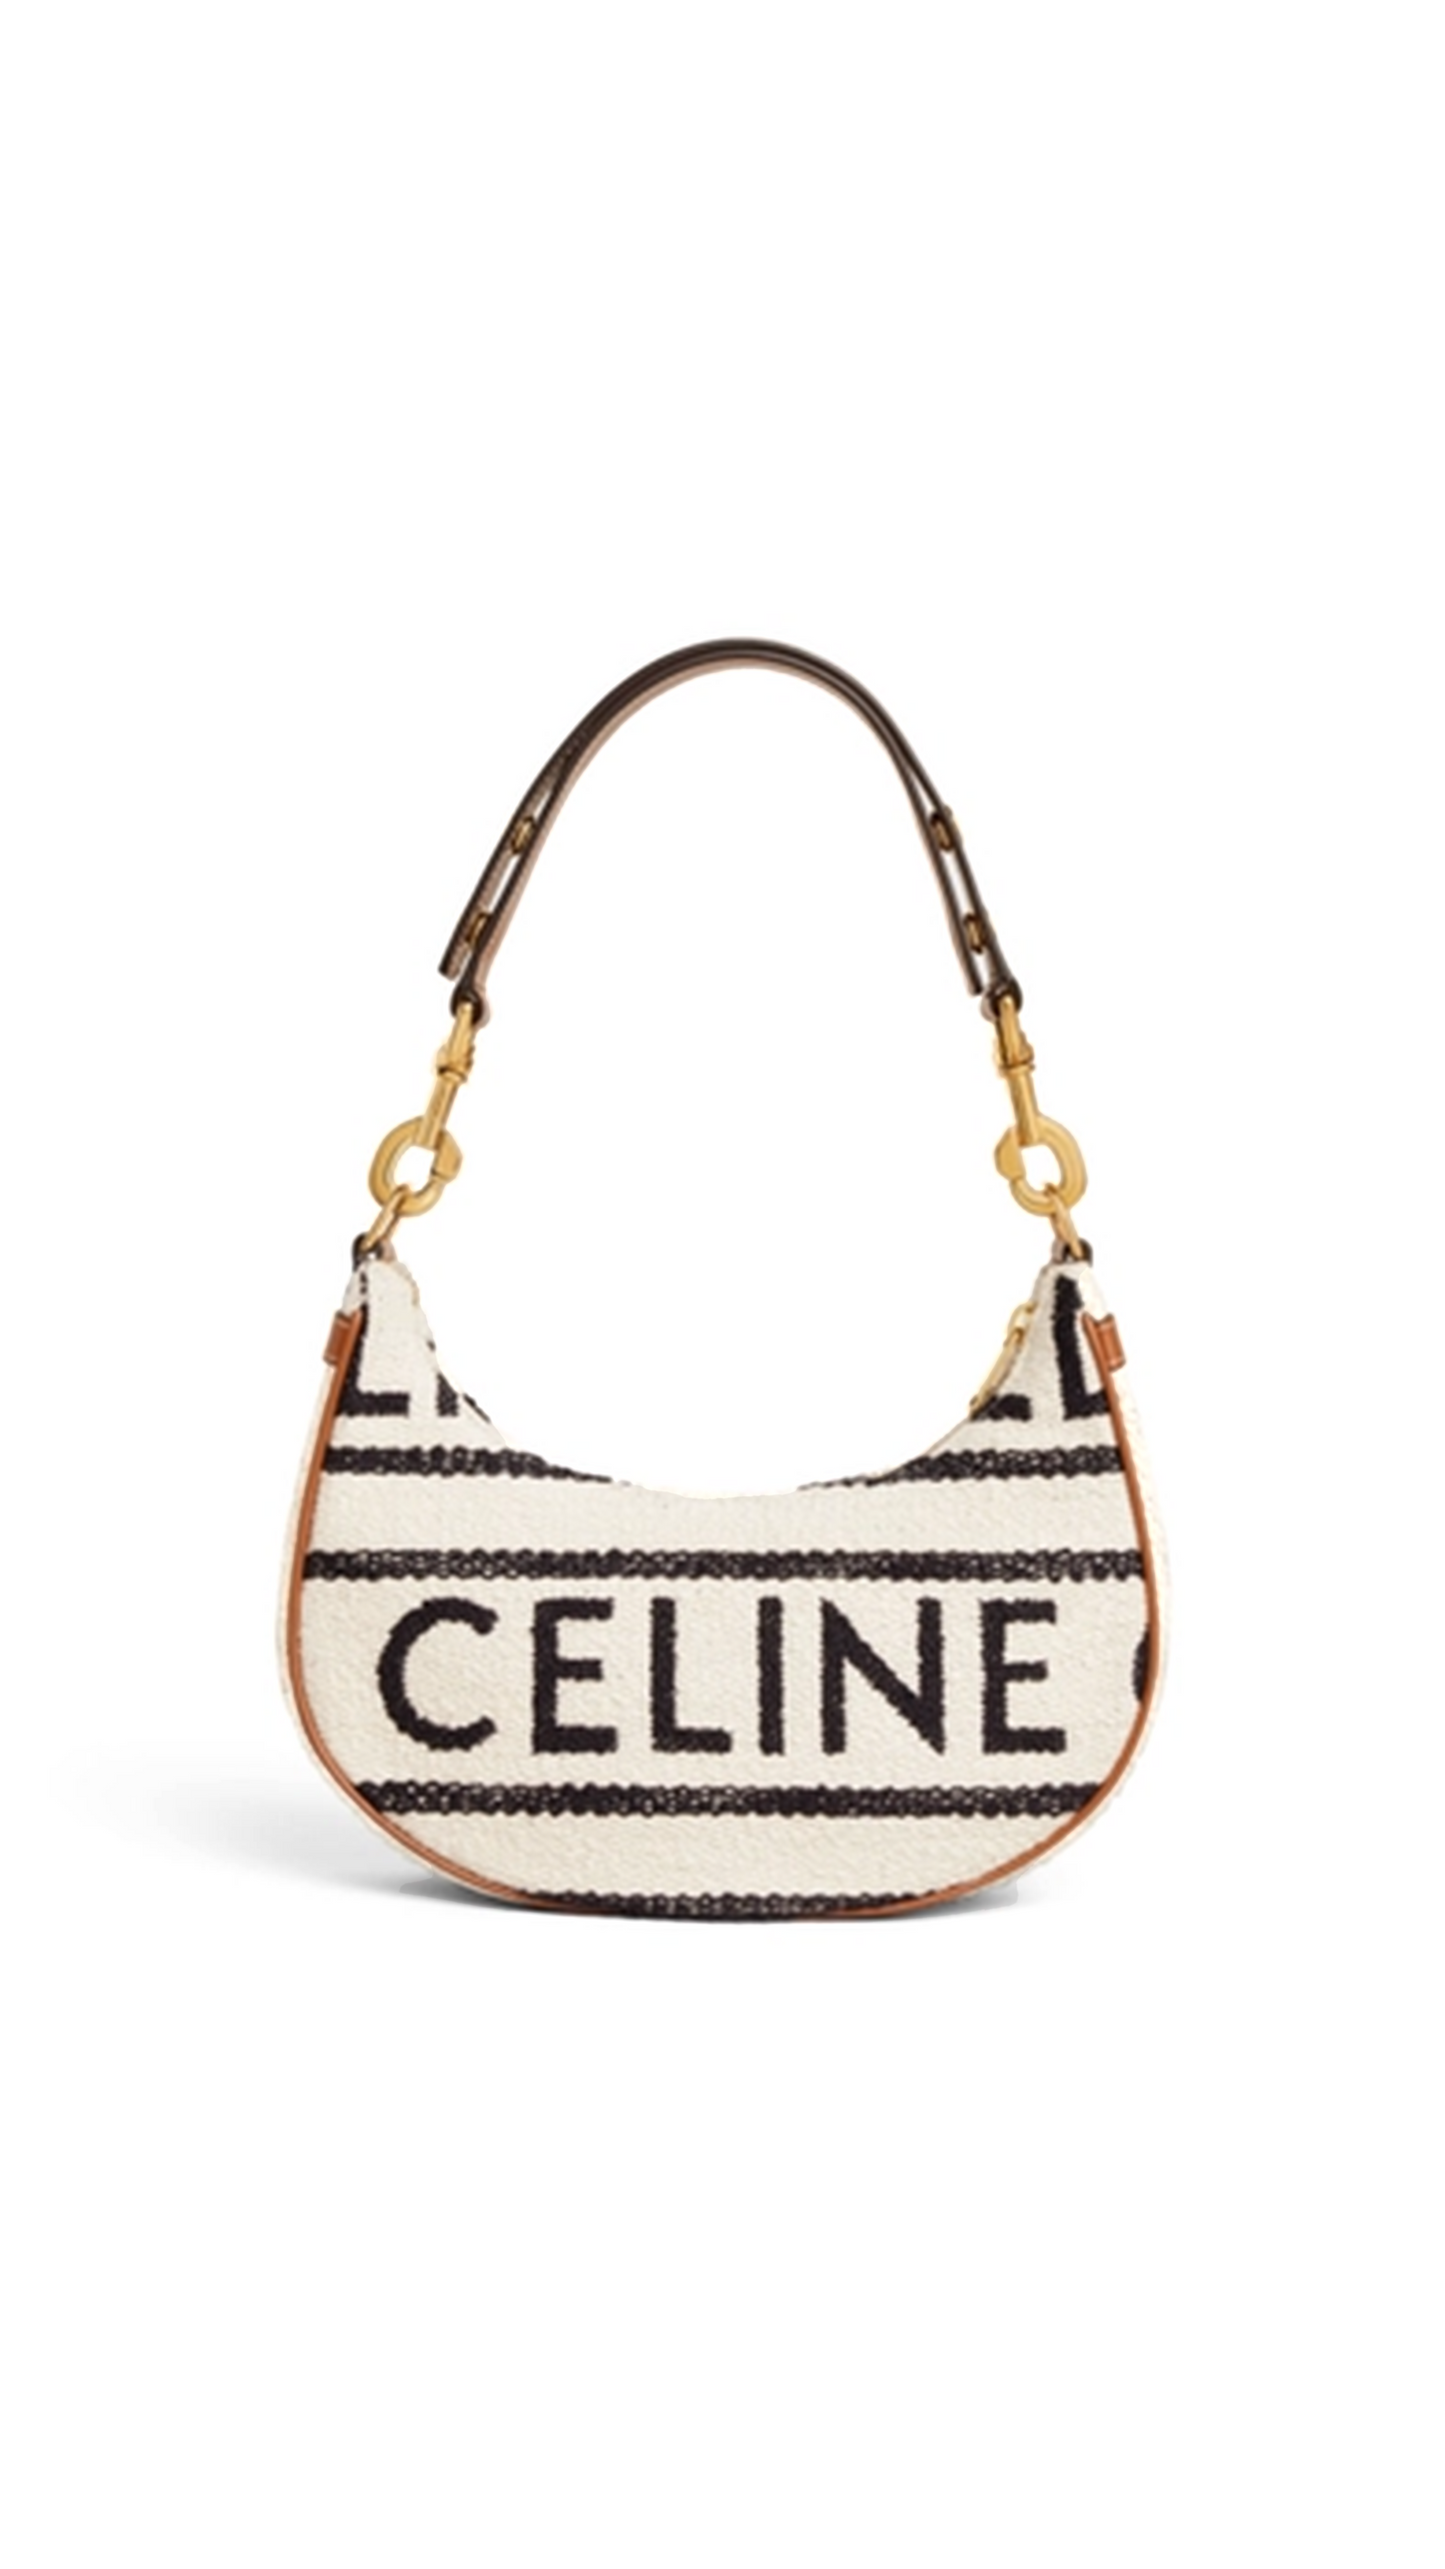 Medium Ava Strap Bag in Textile with Celine All-over and Calfskin - White/Black